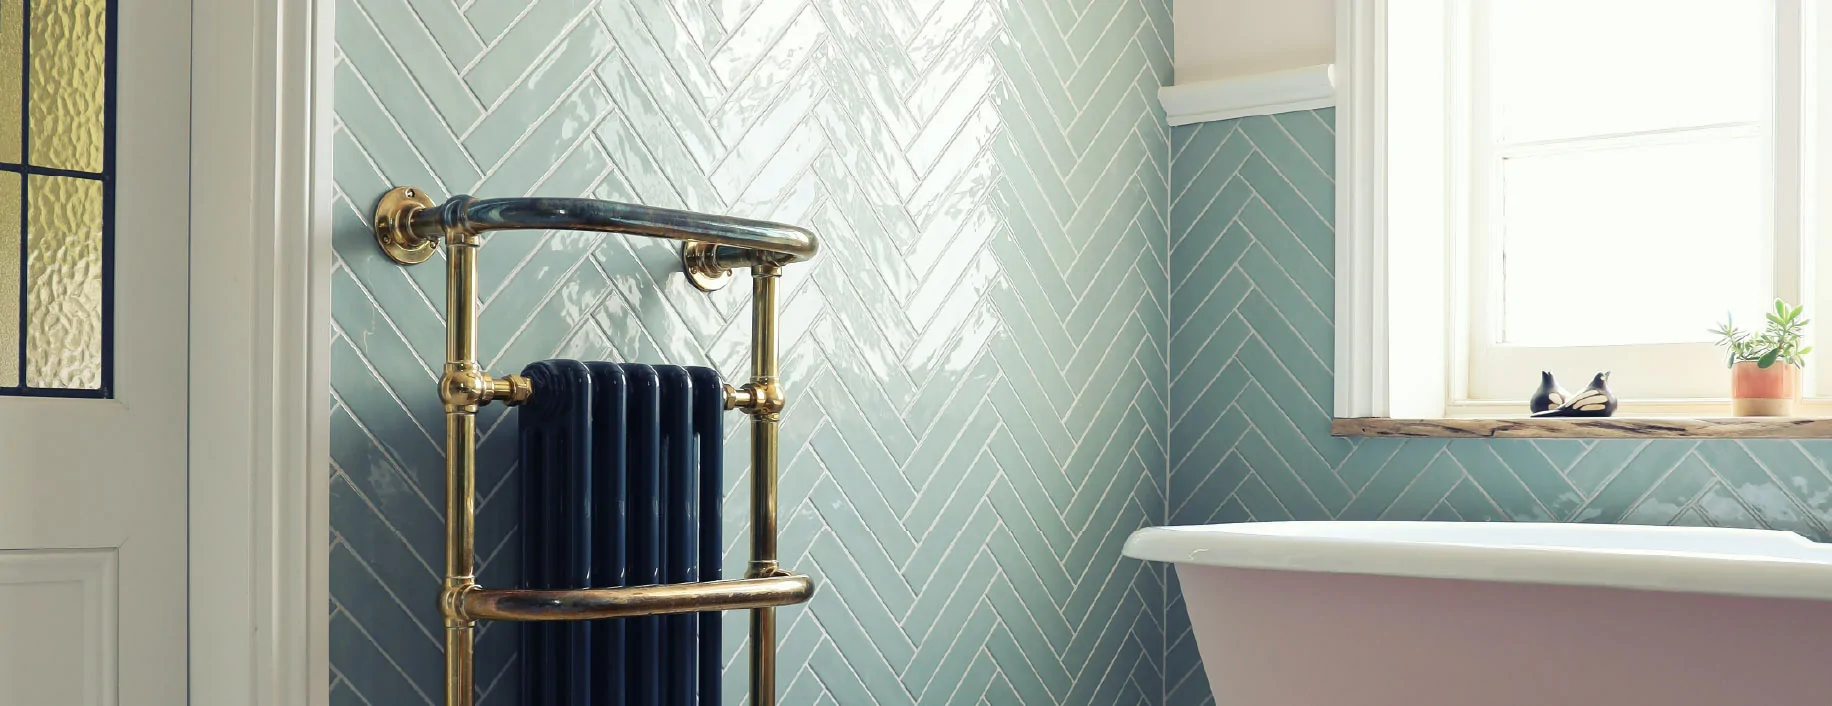 Get the look floor and wall tiles.